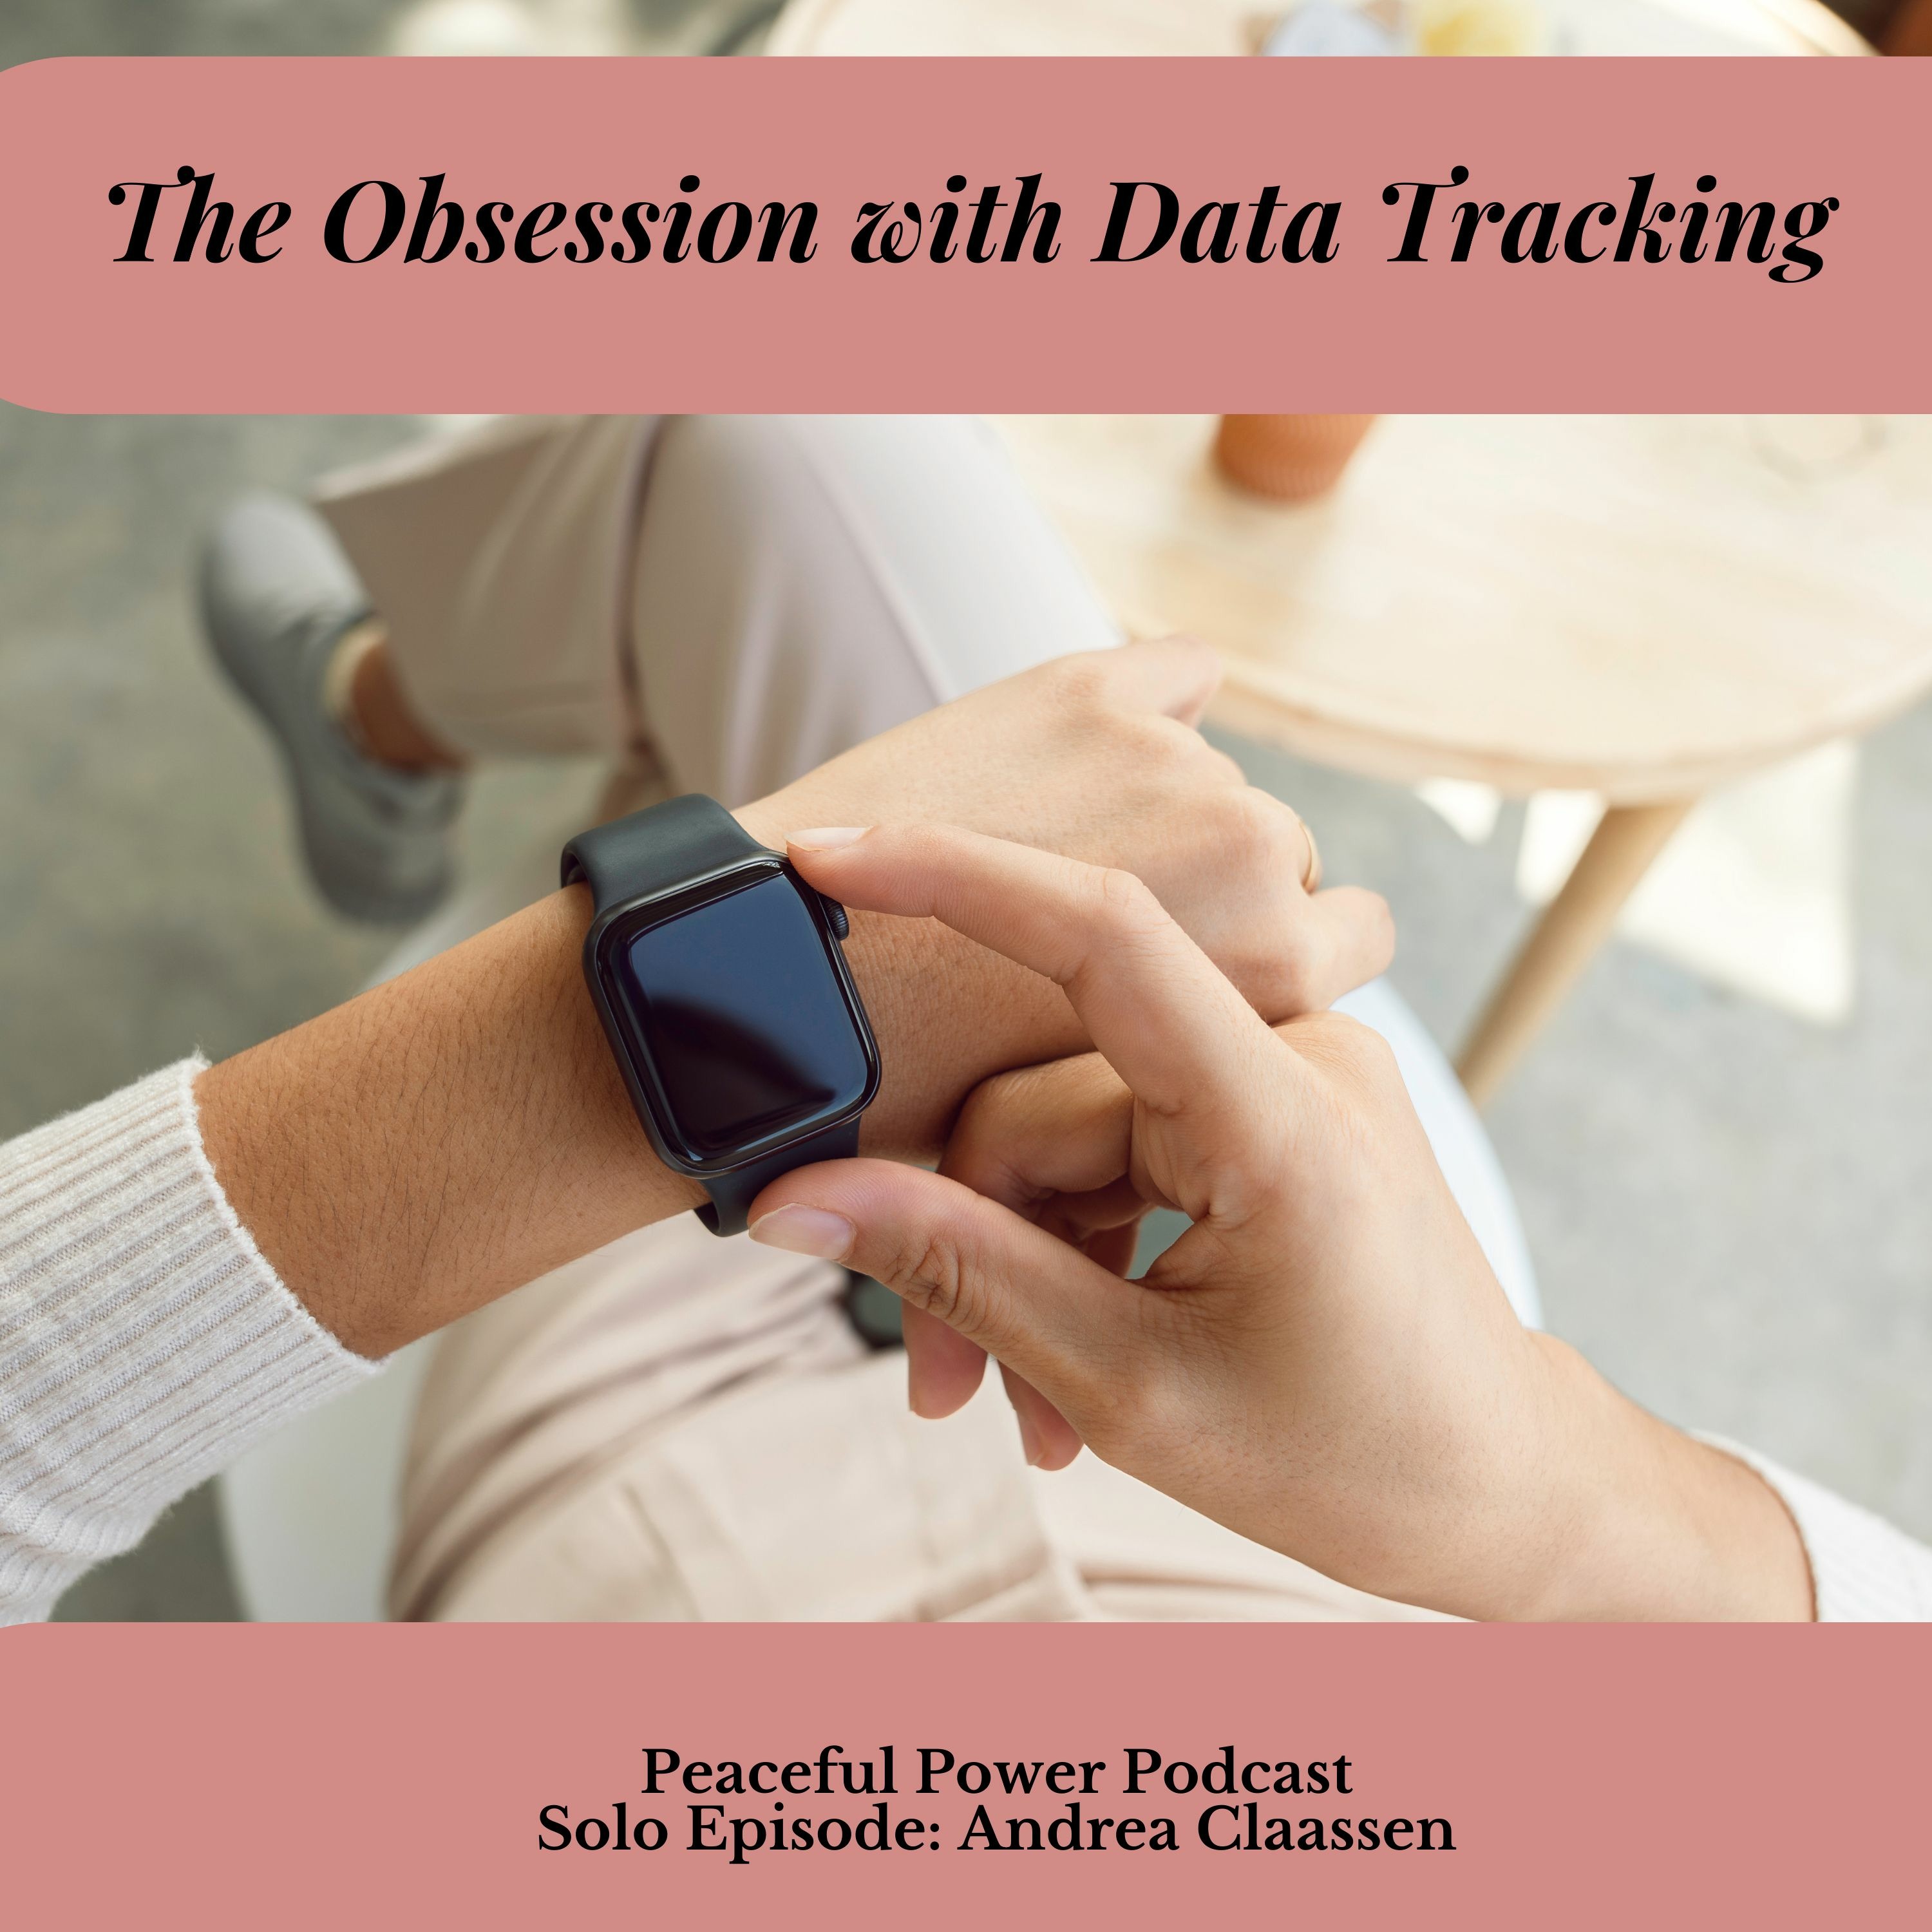 The Obsession with Data Tracking